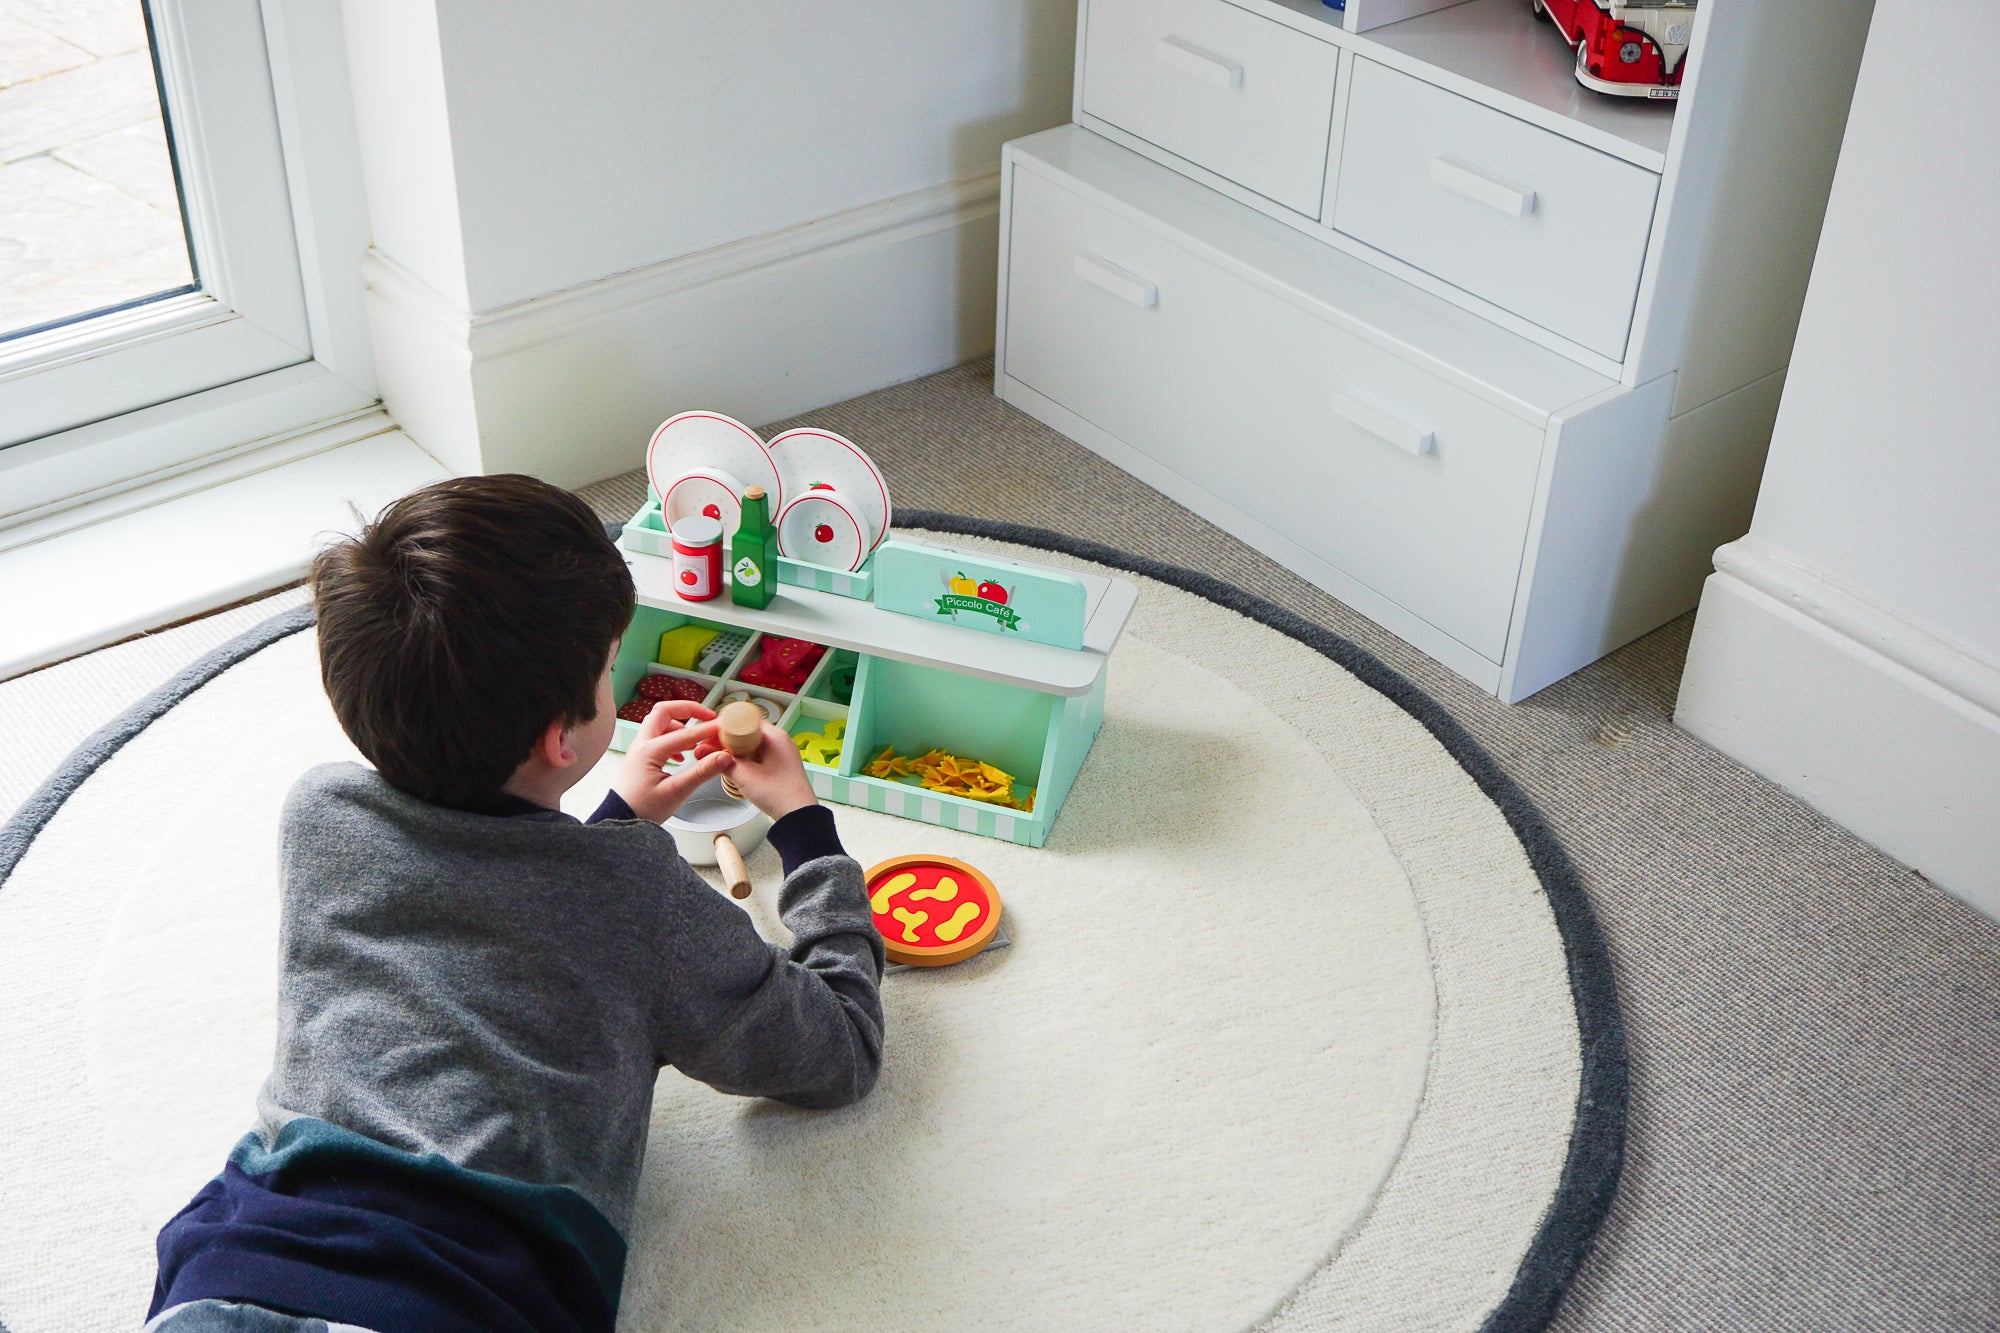 Turn your living room into a shared space with versatile toy storage